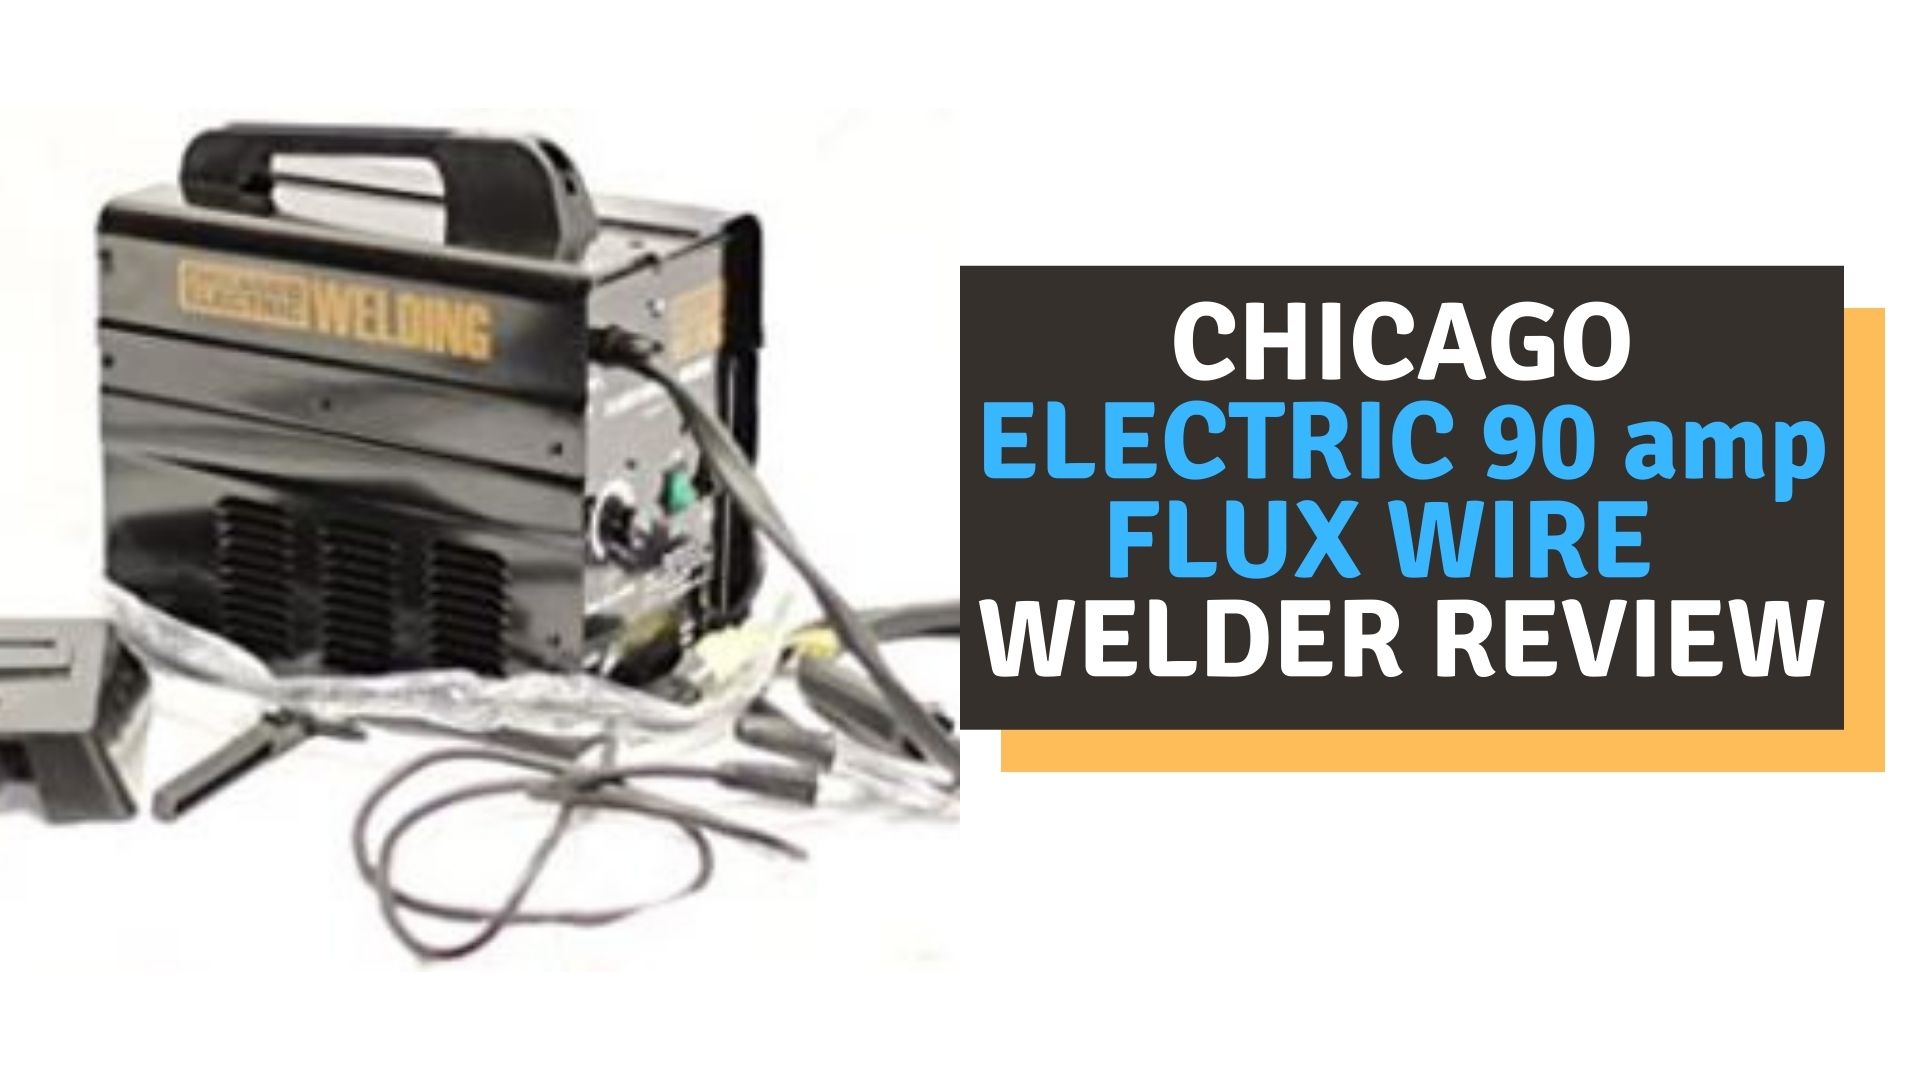 Chicago Electric 90 amp Flux Wire Welder Review of 2022